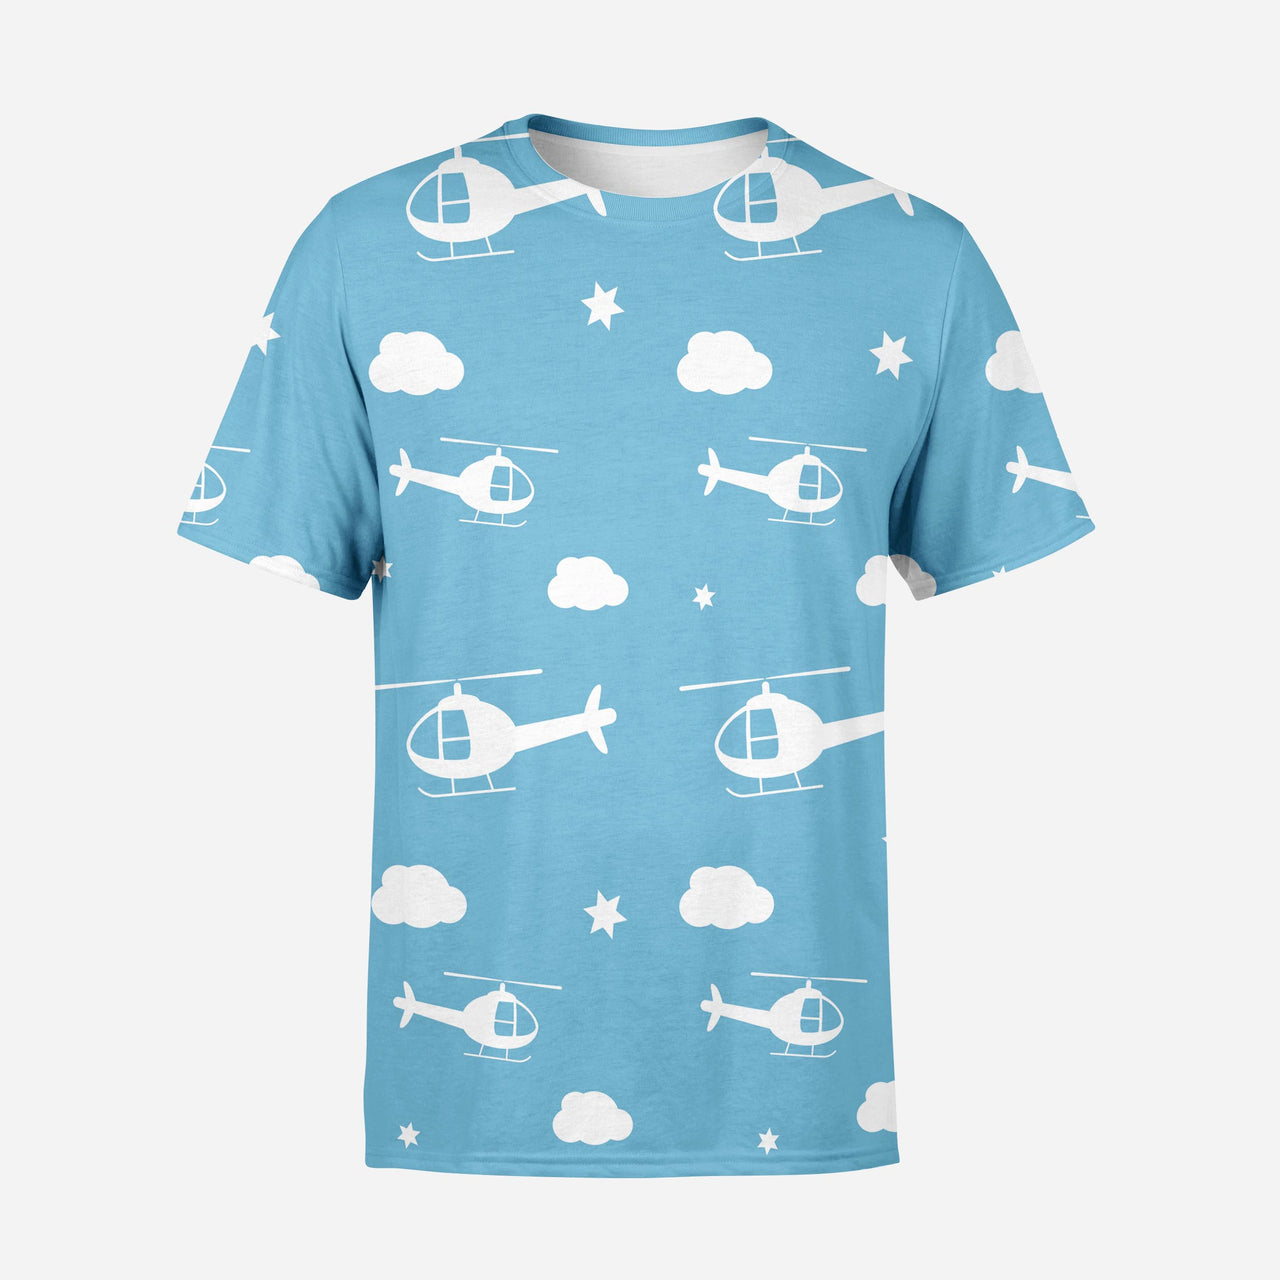 Helicopters & Clouds Printed 3D T-Shirts